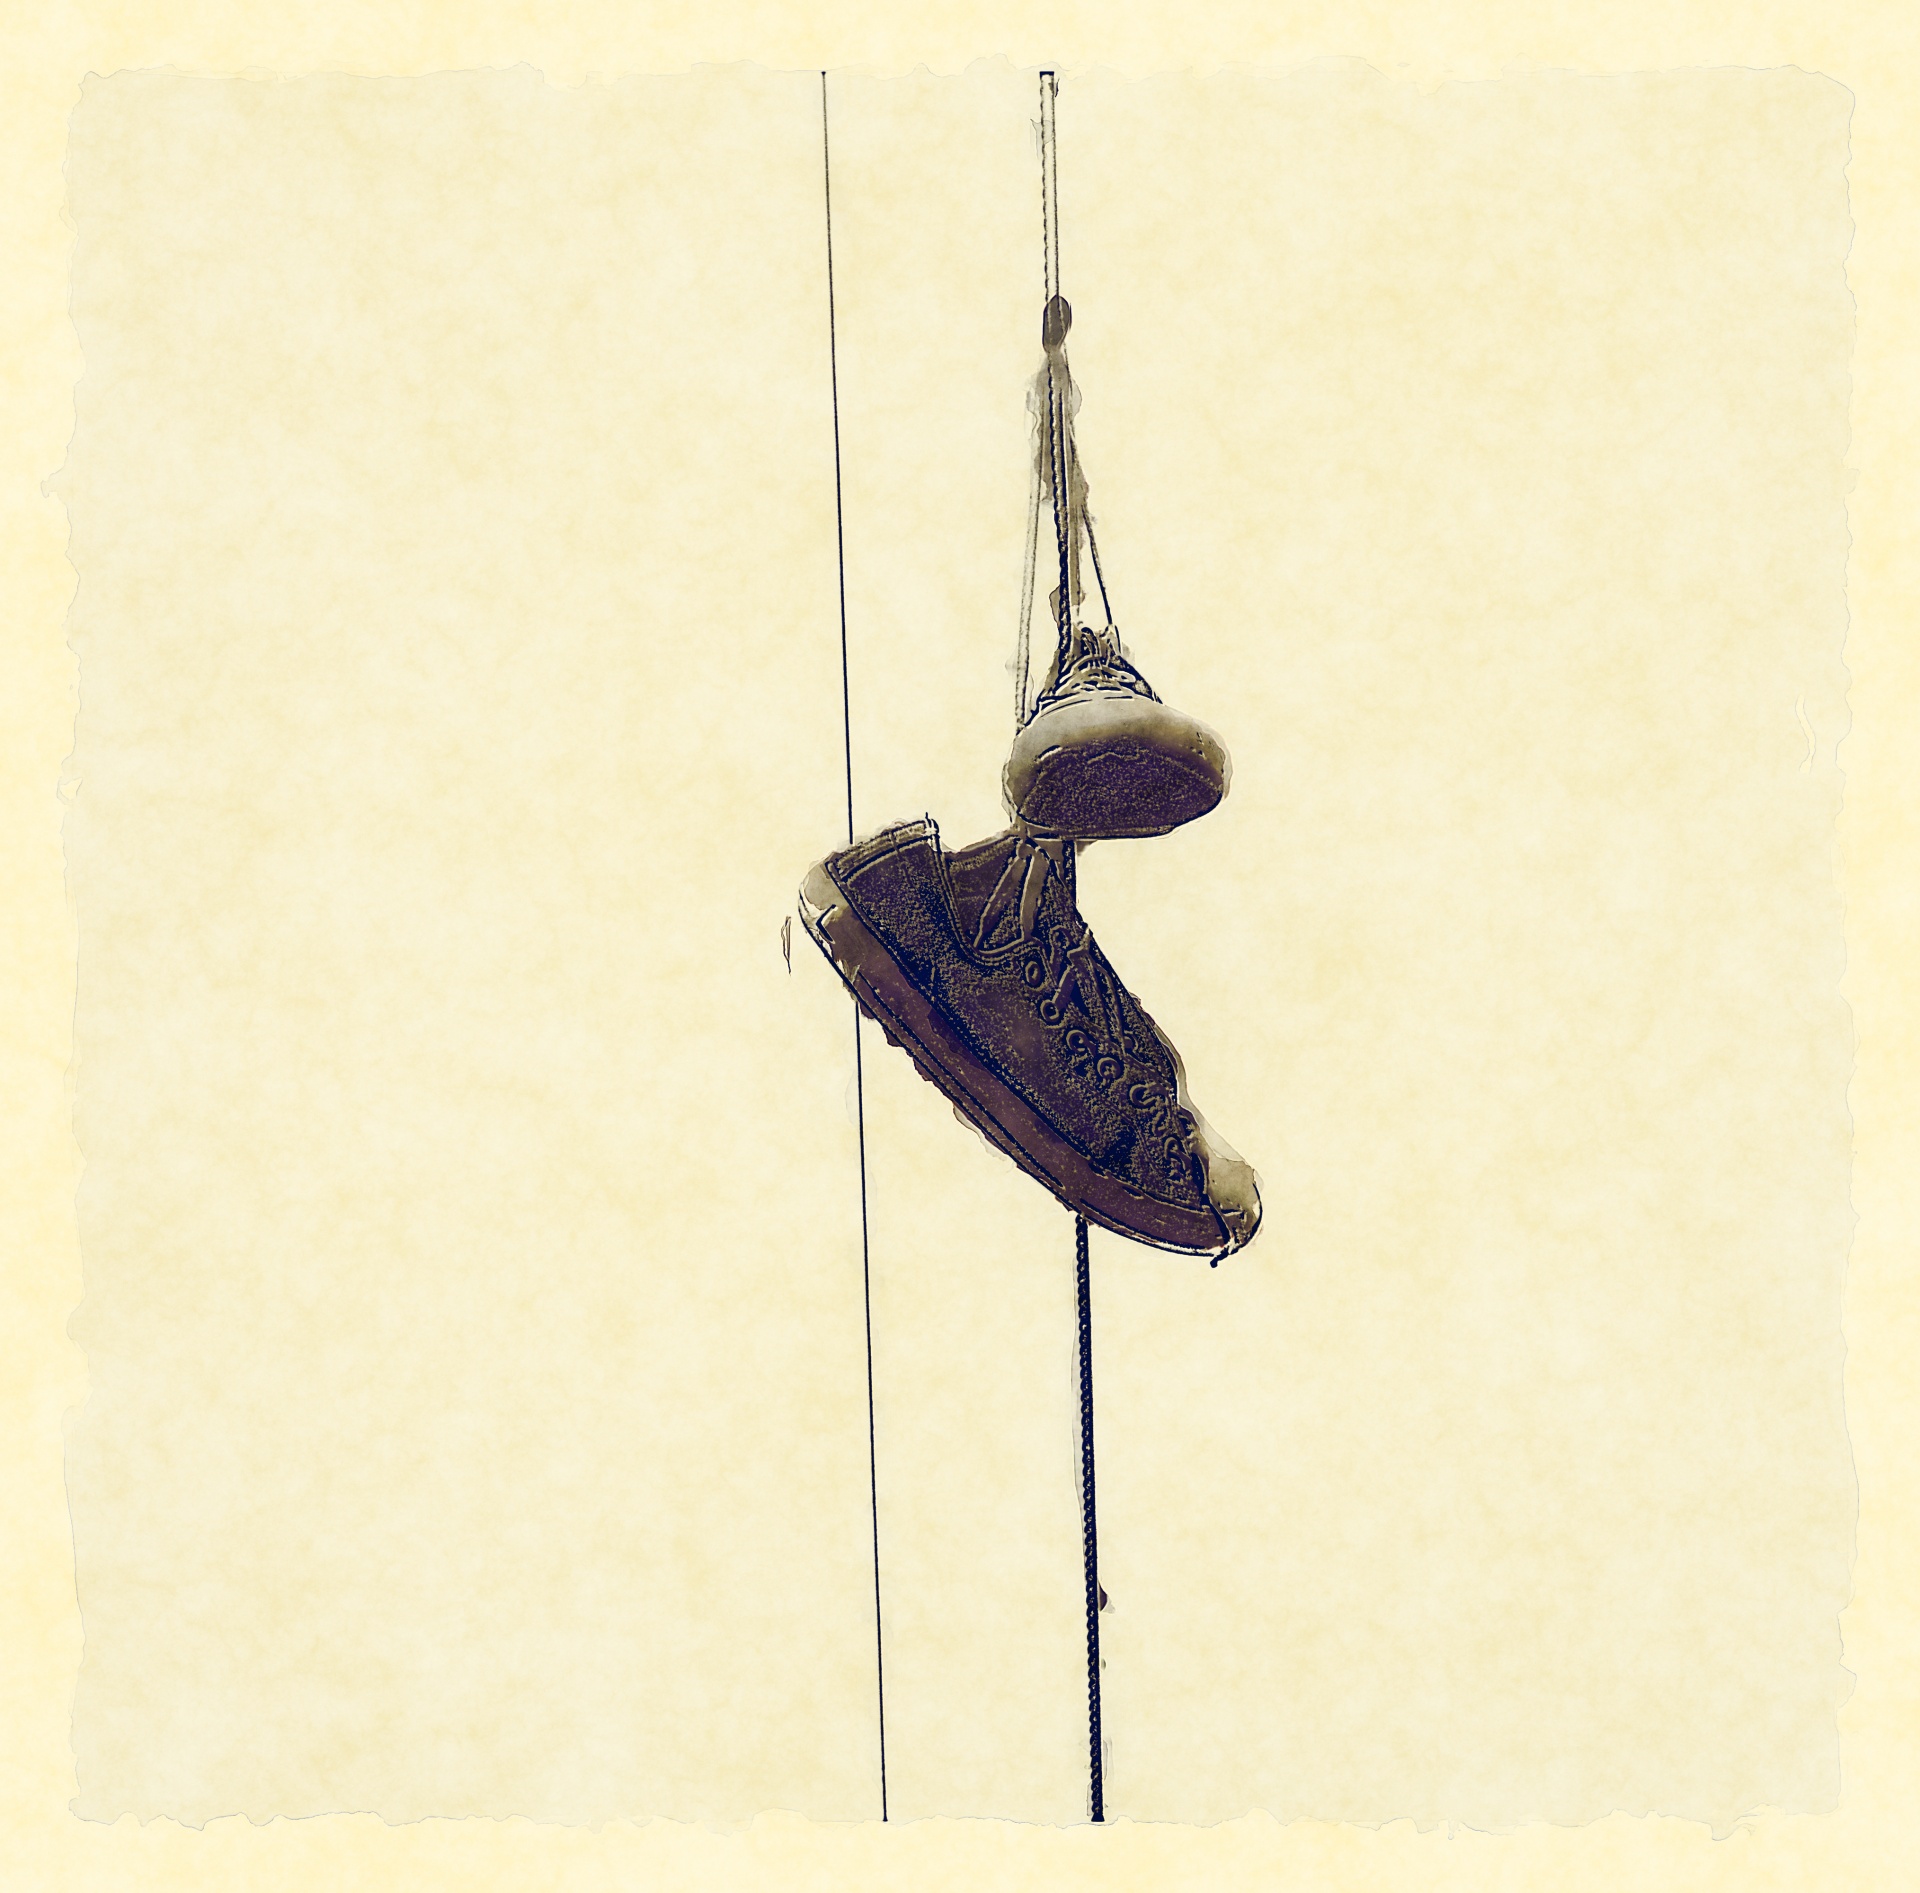 tennis shoes hanging on wire